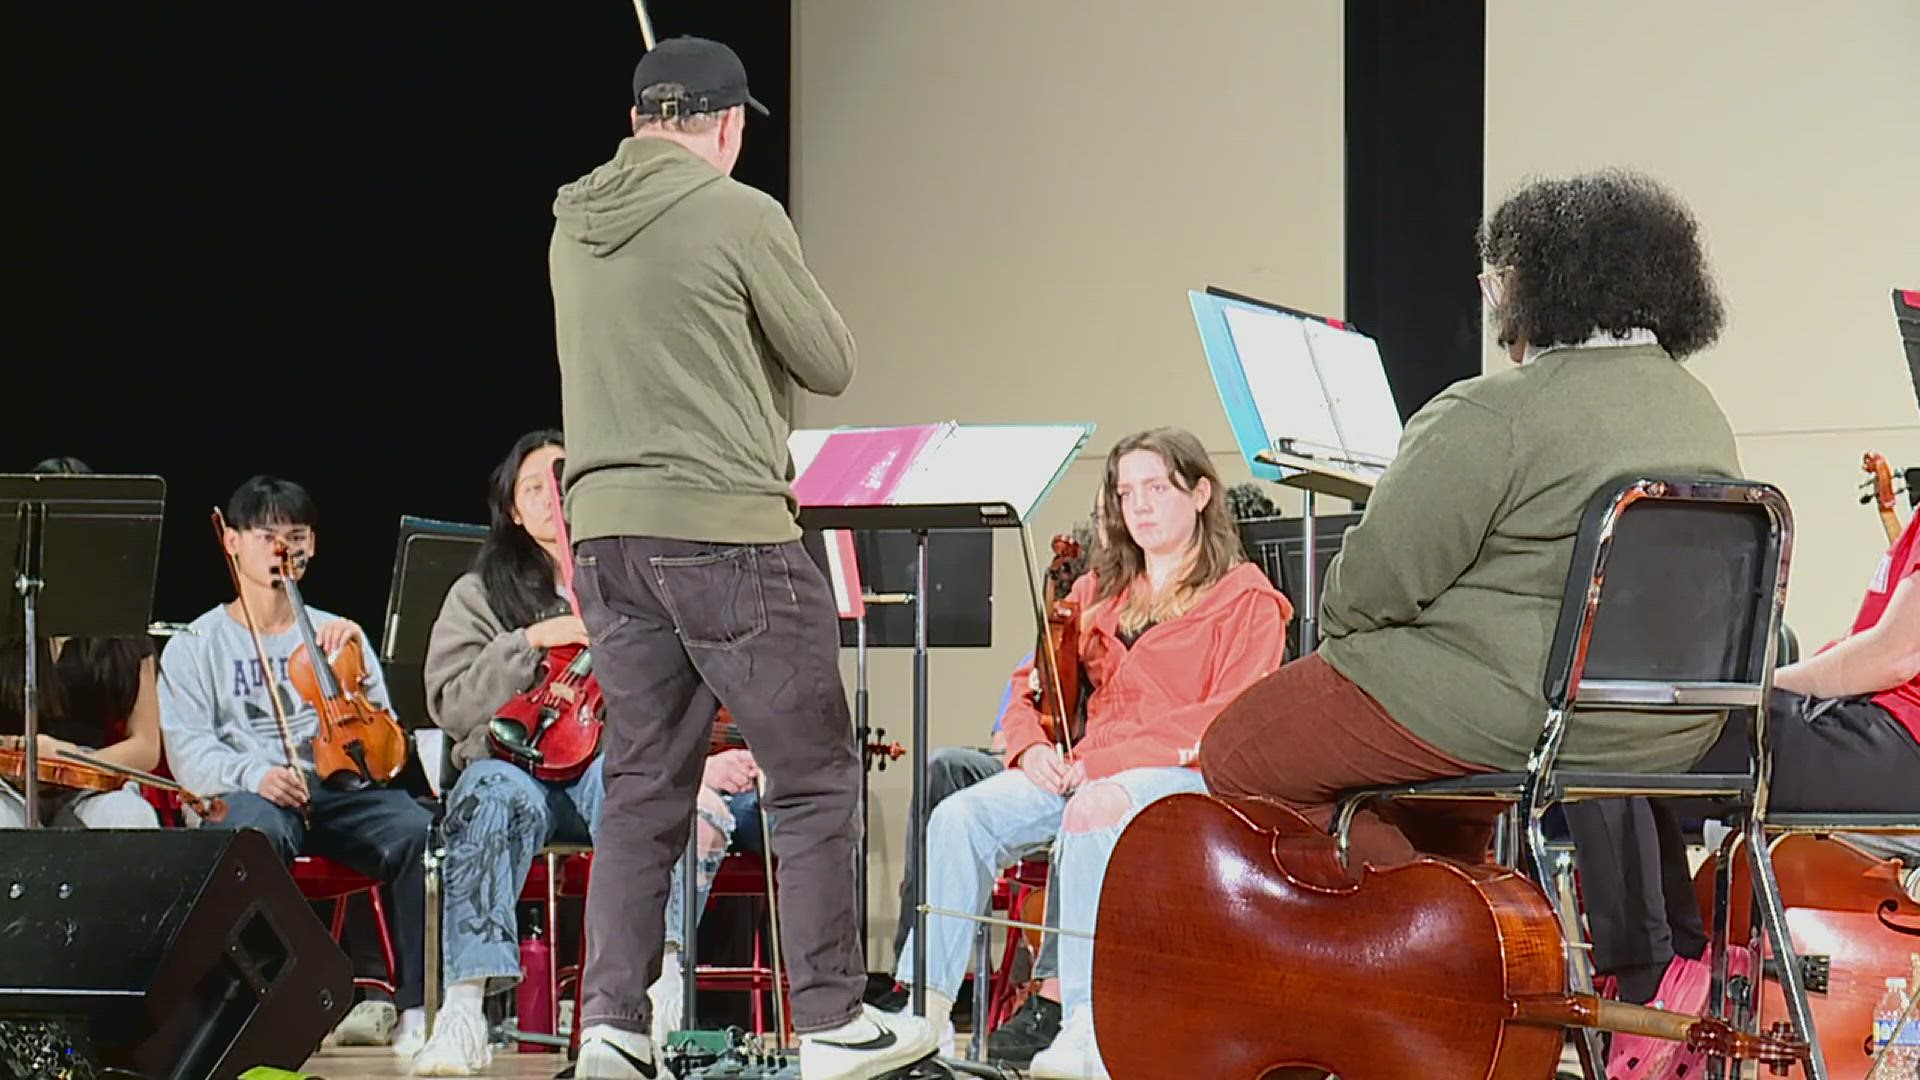 Tracy Silverman, a globe-trotting electric violin player, practiced with the student band, showing them tricks and different types of music to play.